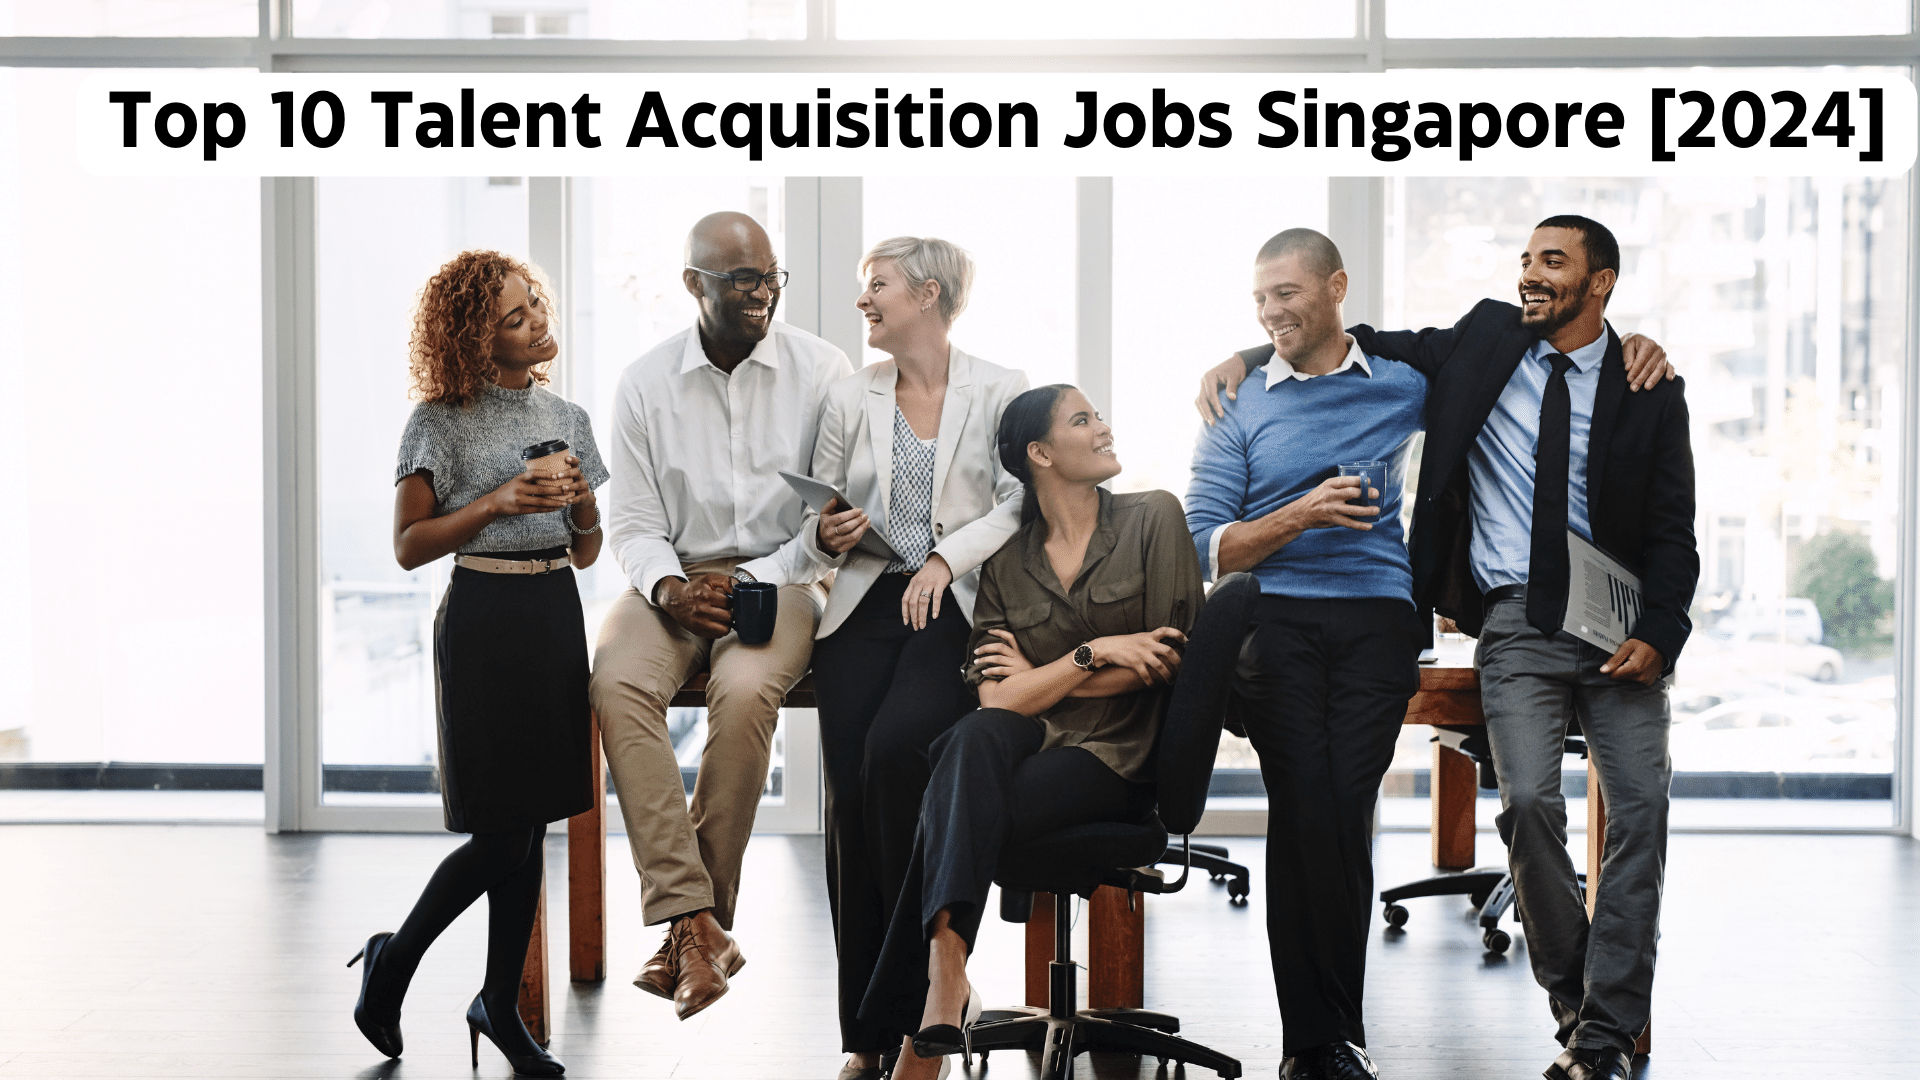 Top 10 Talent Acquisition Jobs Available in Singapore (2024)